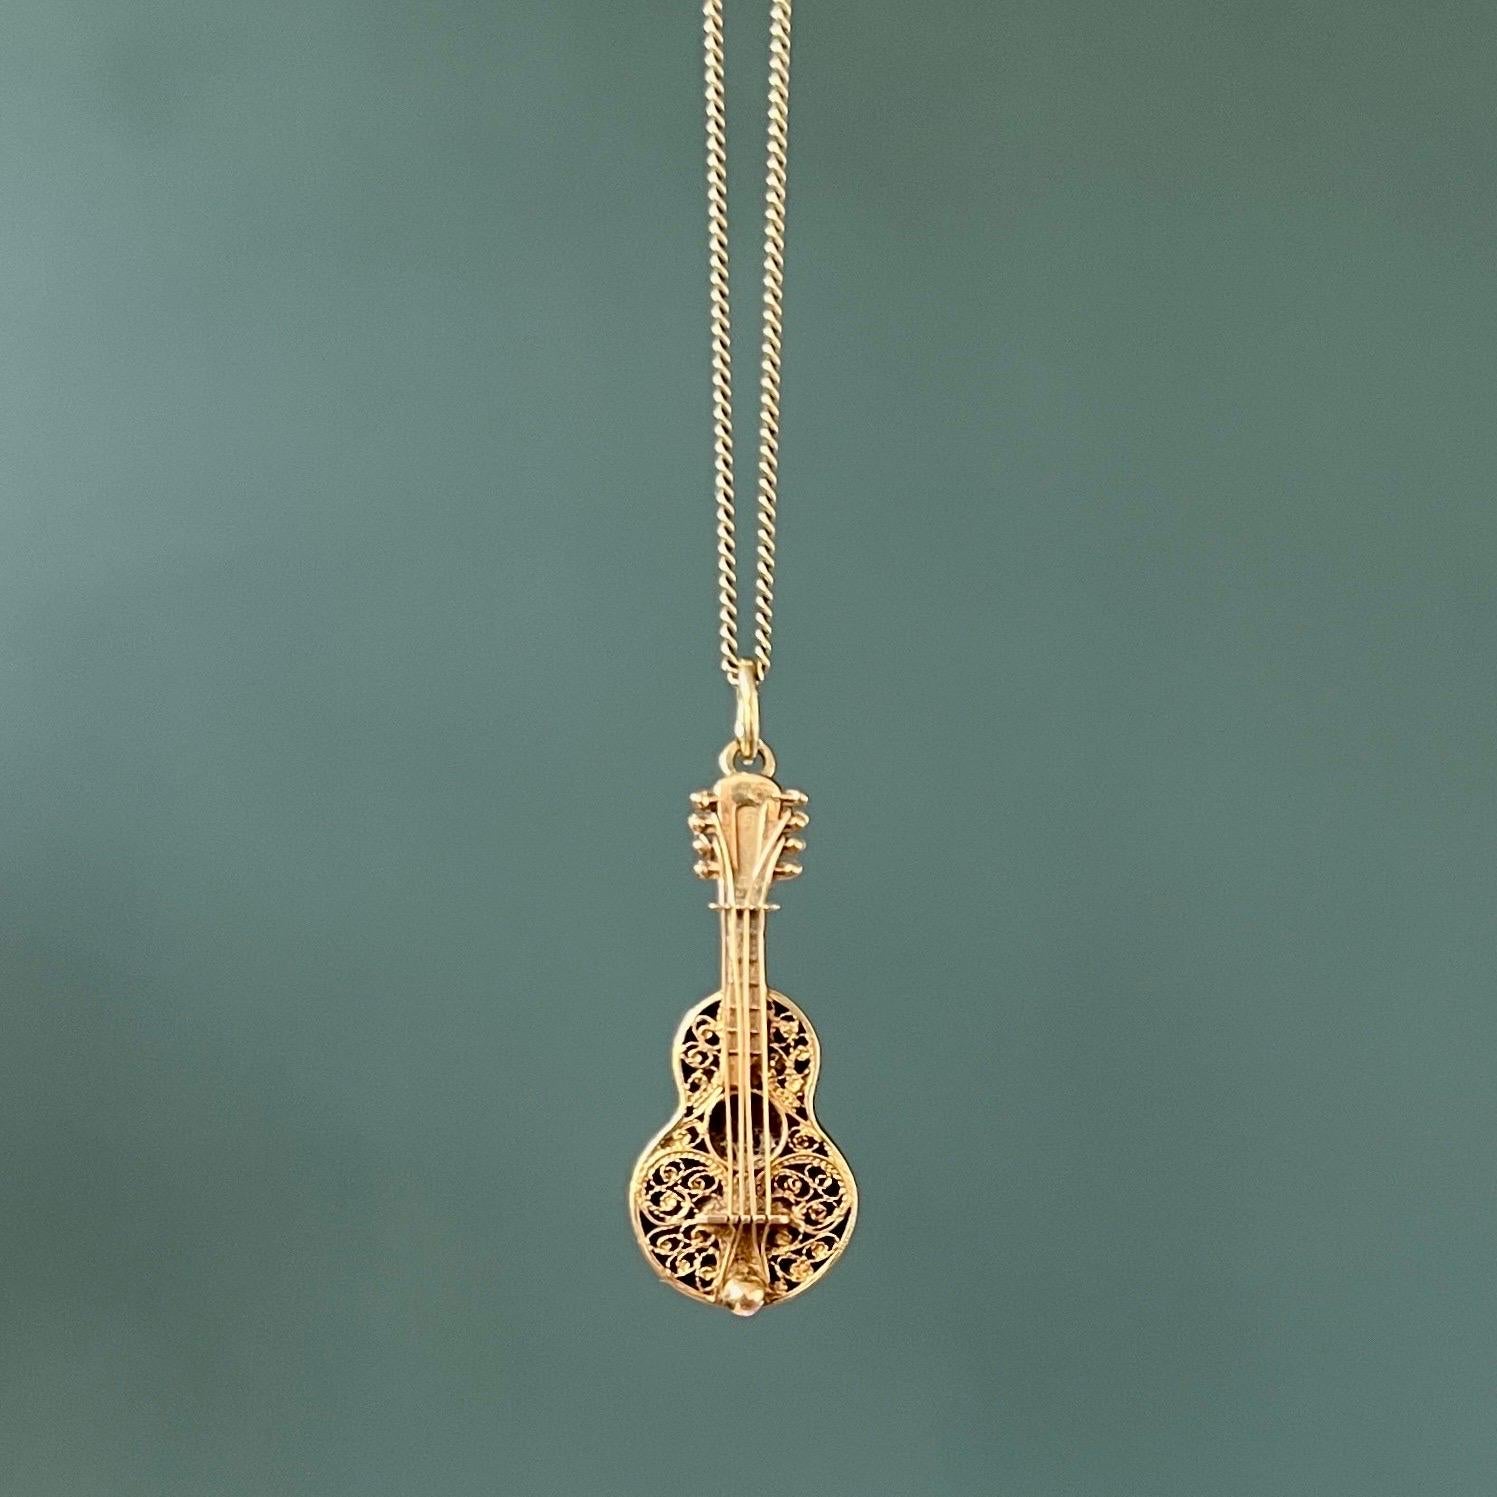 A vintage 1960's 14 karat gold guitar charm pendant. The top of the guitar is stylized with fine filigree and gold strings. The head of the guitar is equipped with tuning pegs.  

Collect your own charms as wearable memories, it has a symbolic and